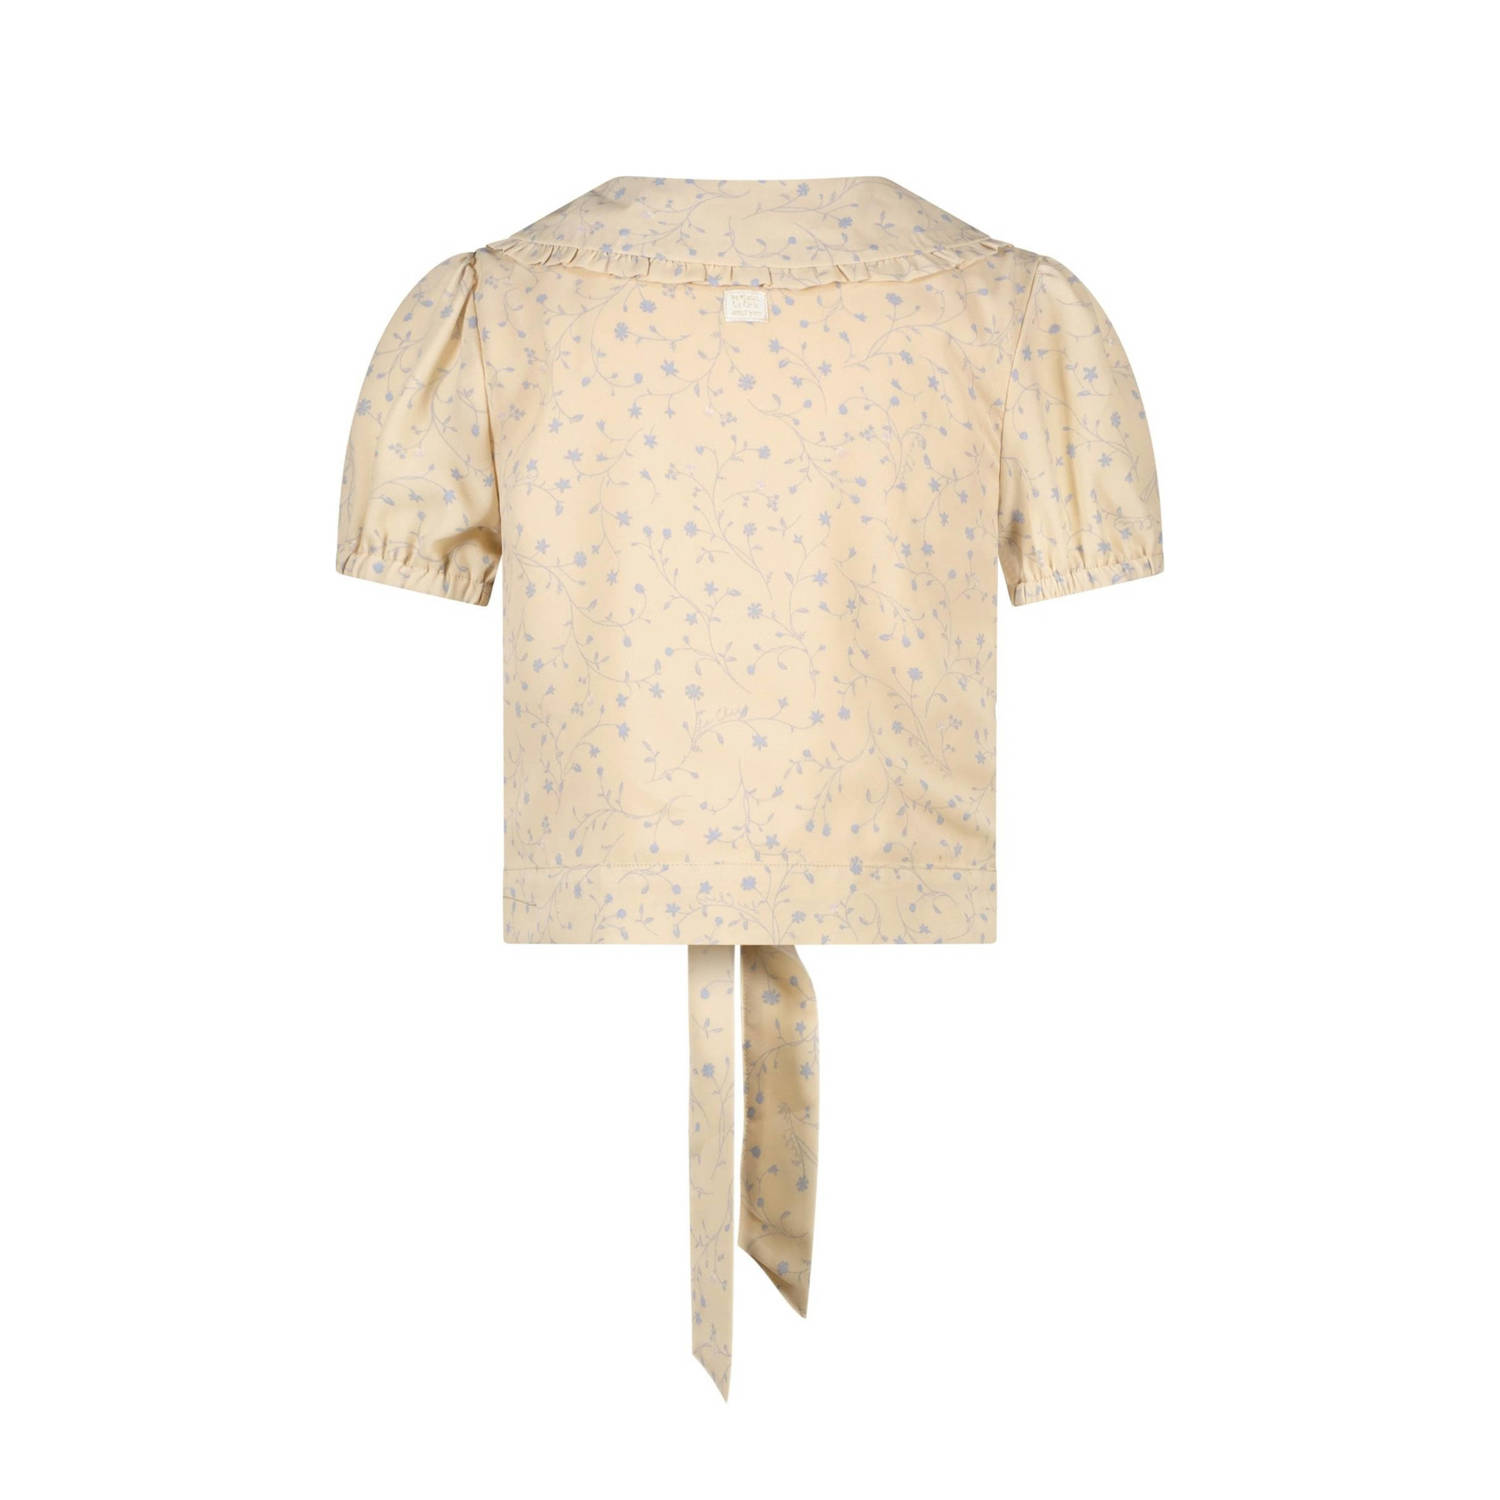 Le Chic blouse EDWY met all over print beige